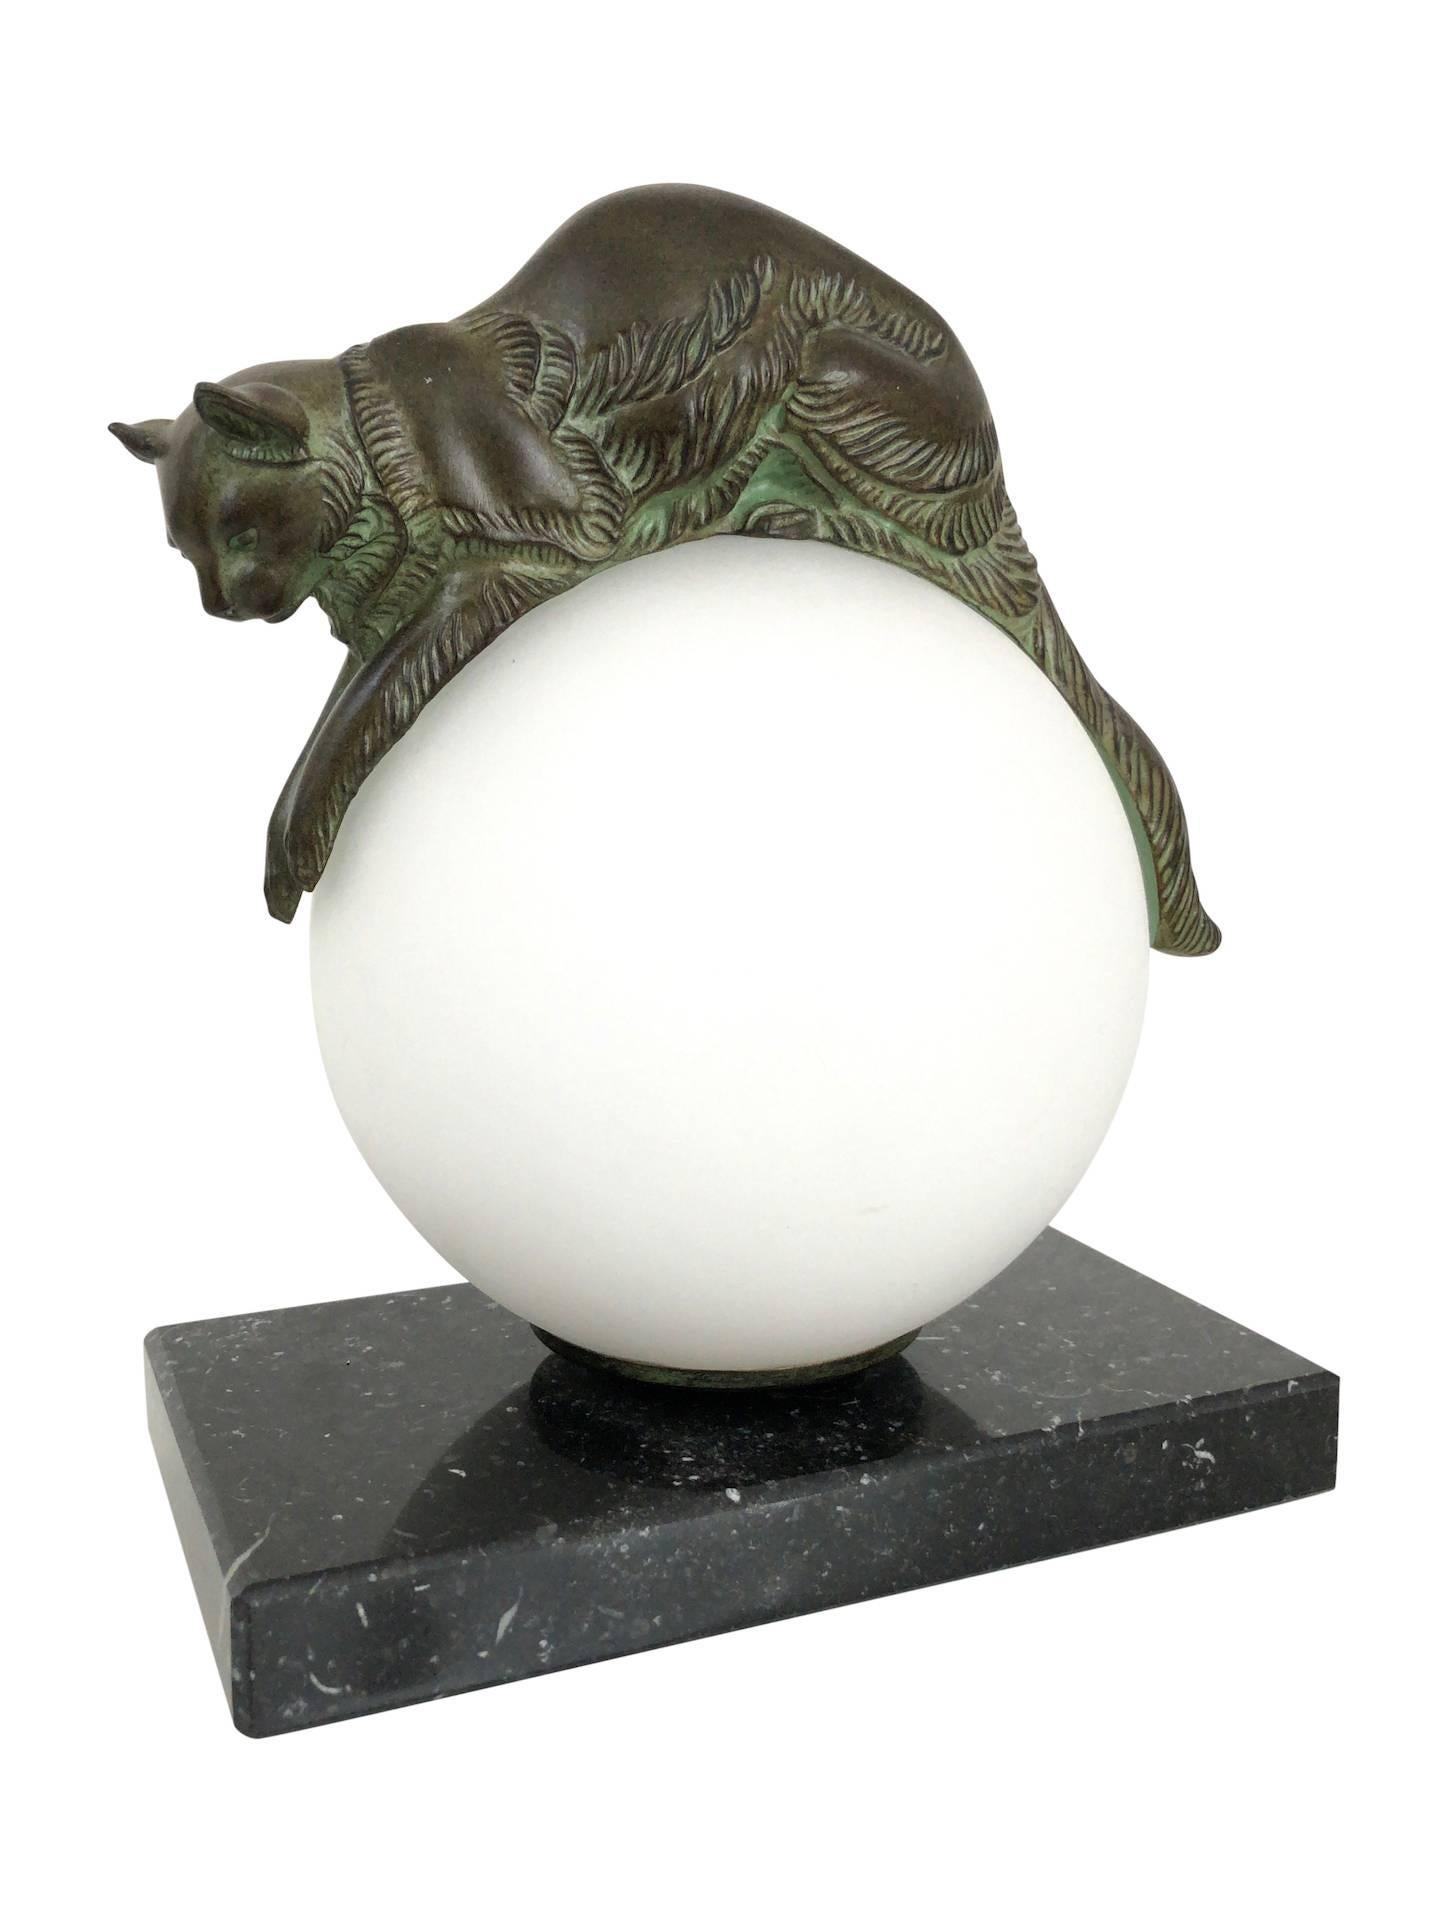 “Equilibre” 
Cat keeps balance on a lighted glass ball 
Designed in France during the roaring 1920s by “Gaillard” 
Original “Max Le Verrier” 
Art Deco style, France.

Table lamp made in “Régule” (spelter)
Socle in black marble (could have a